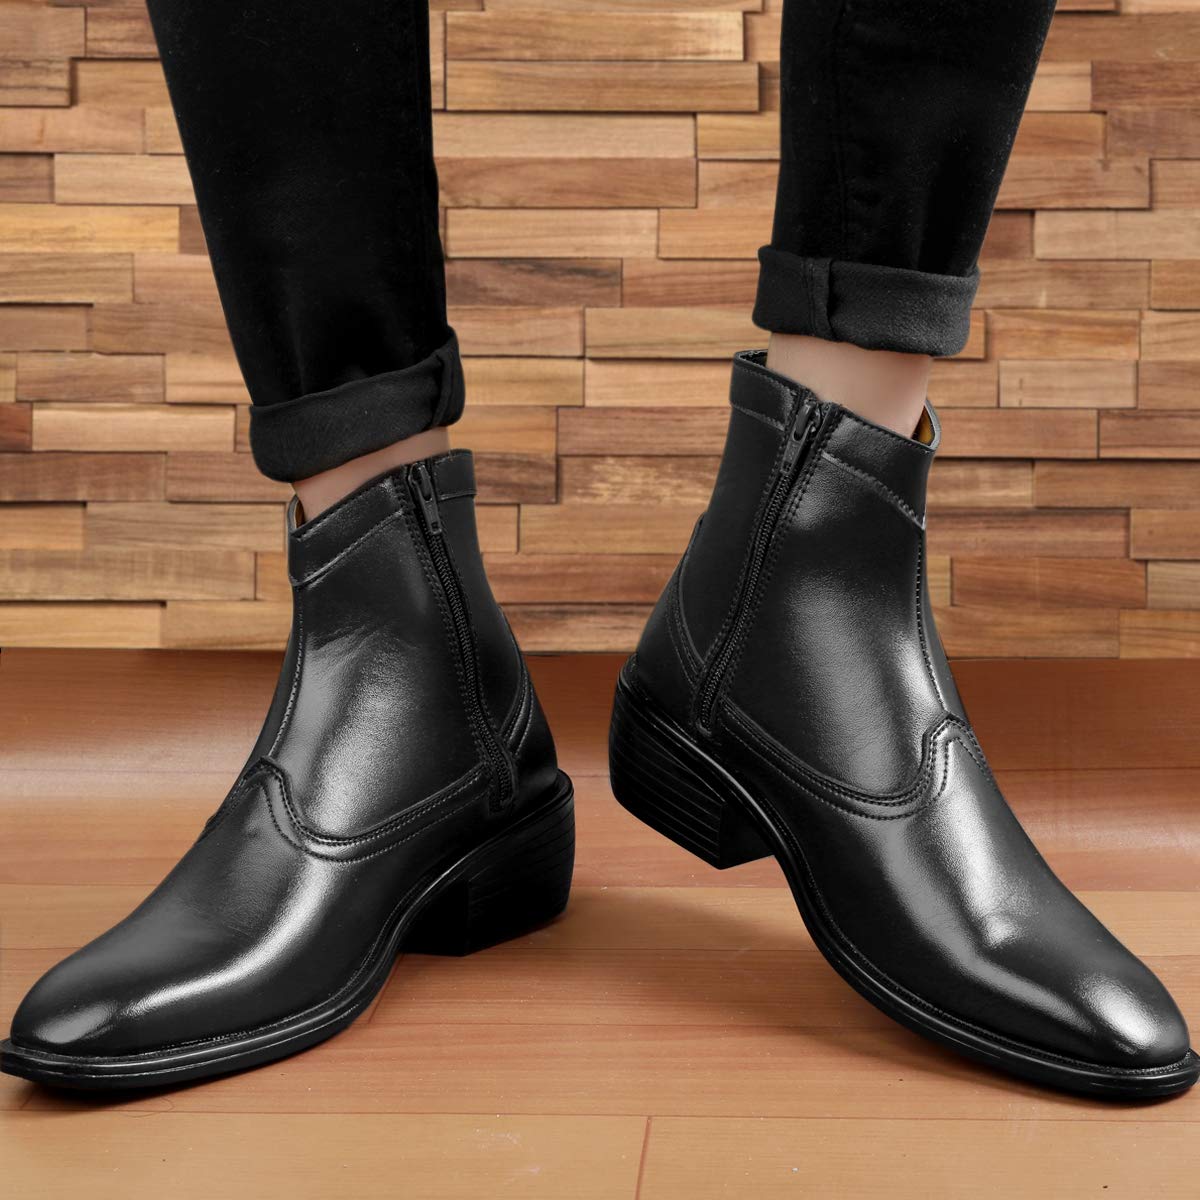 Classy High Ankle Black Casual And Formal Boot With Zip Pattern-JonasParamount